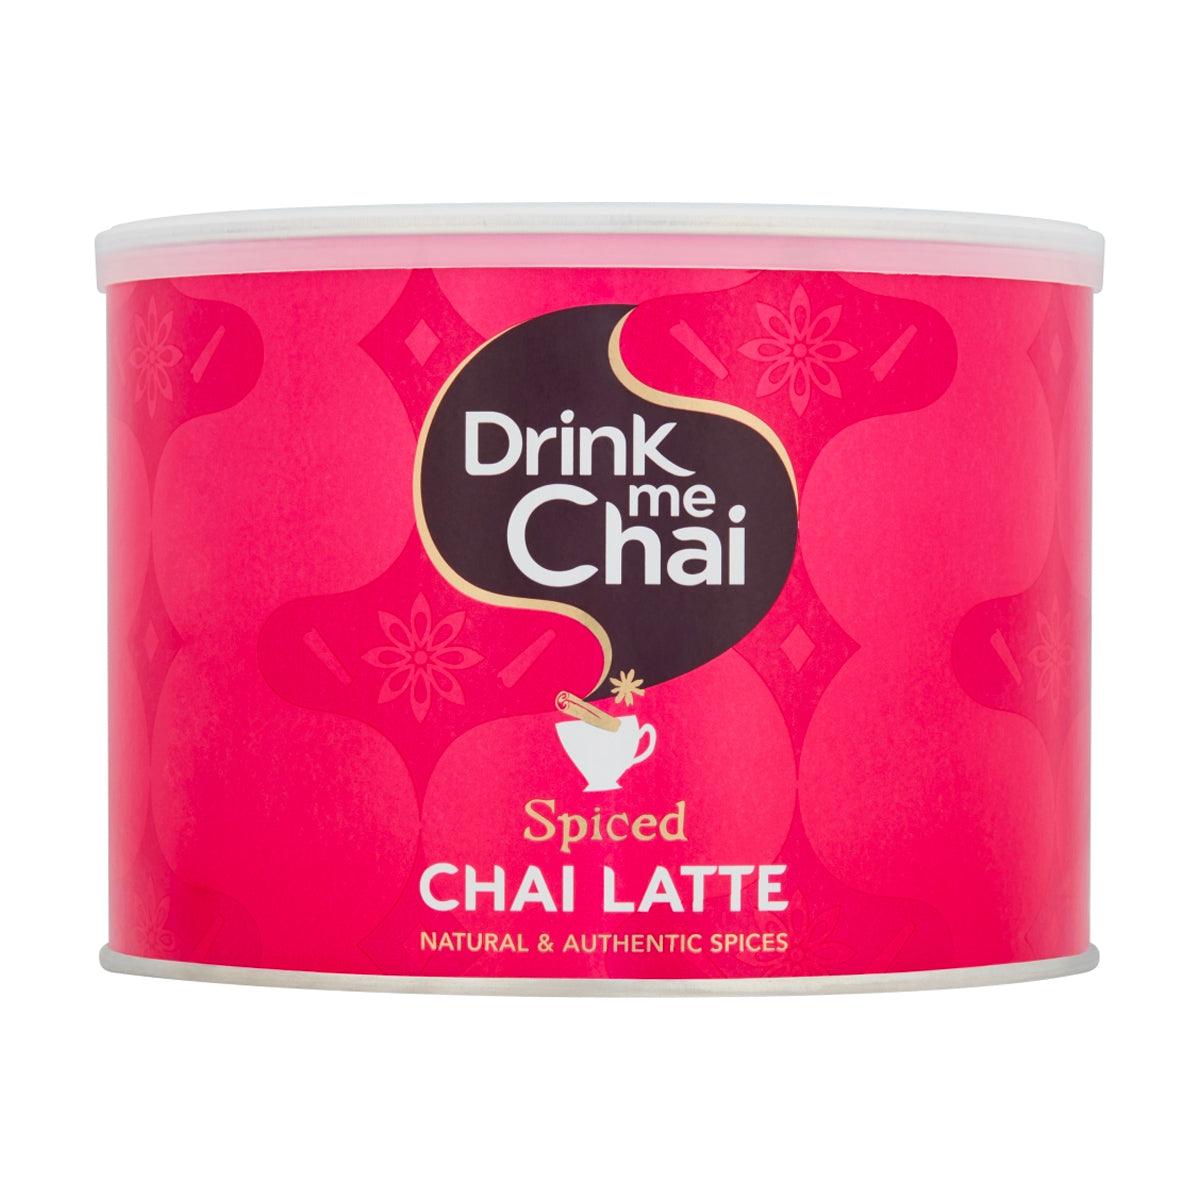 Drink Me Chai: Spiced Chai Latte Mix - 1KG Catering Tub - Vending Superstore